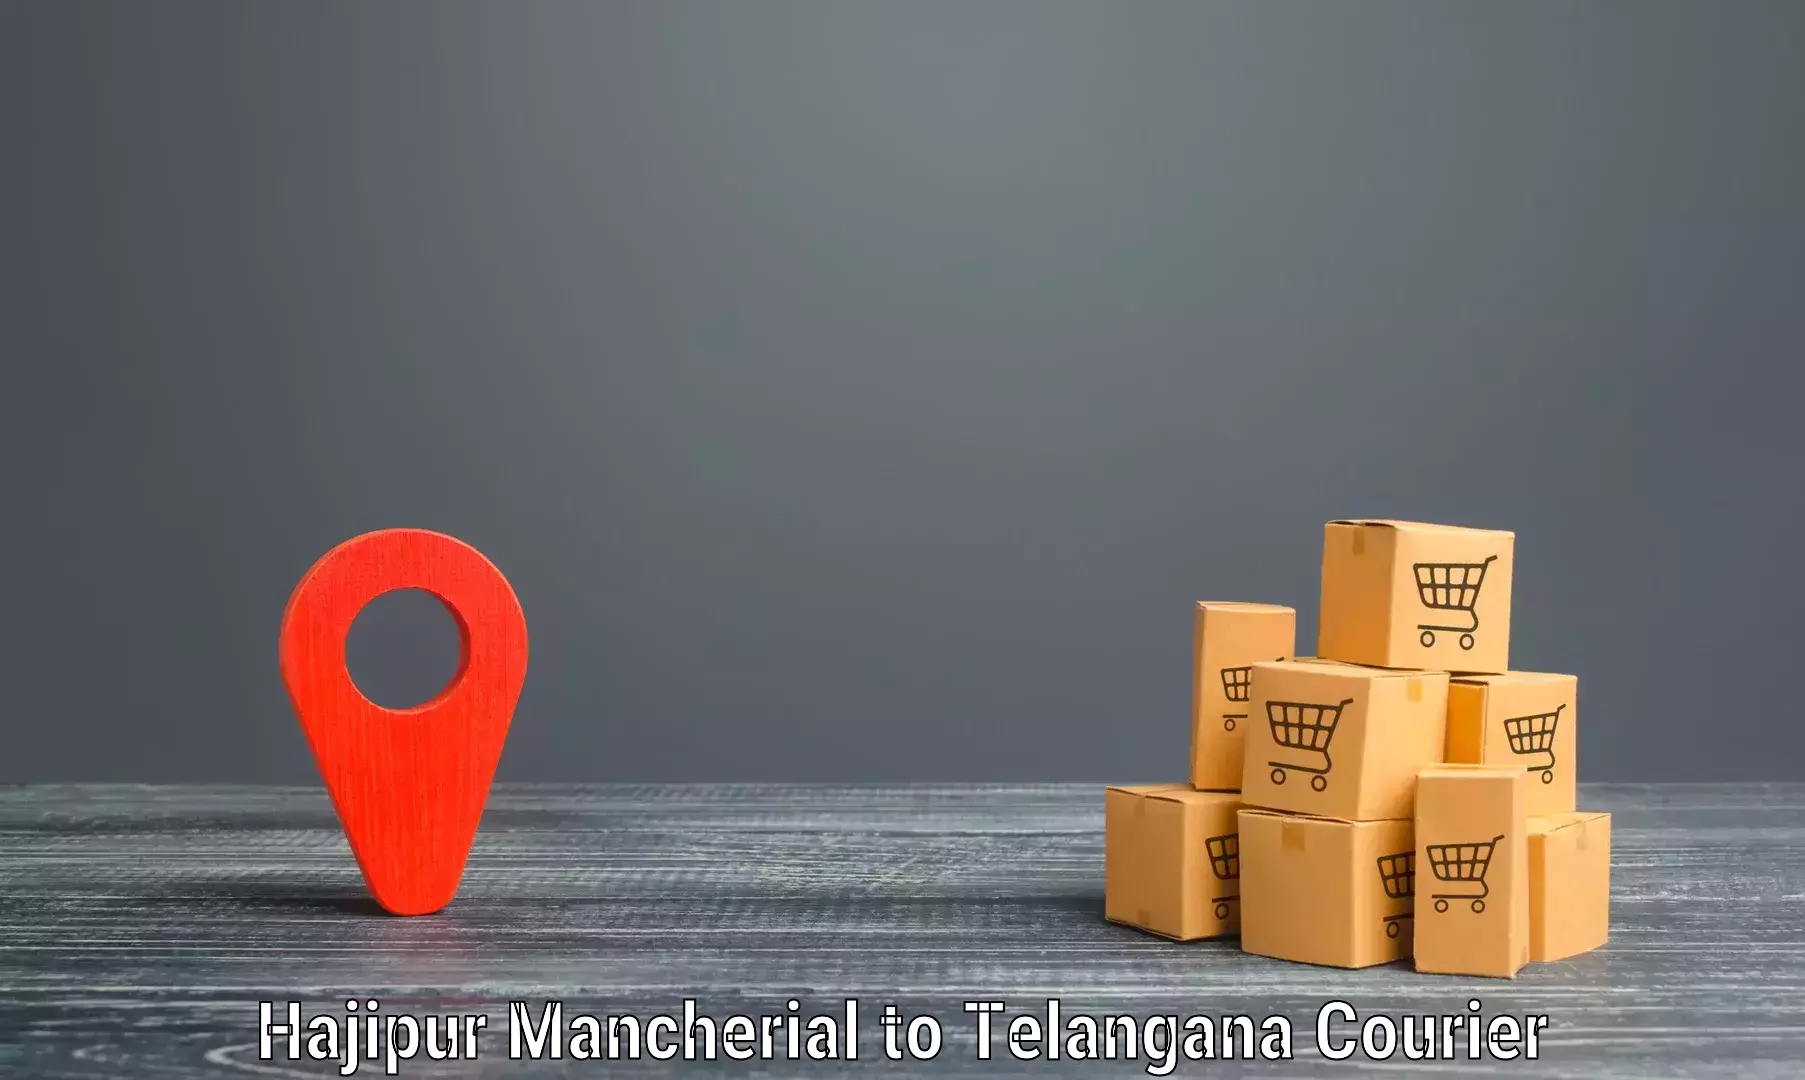 24-hour courier service Hajipur Mancherial to Vemulawada